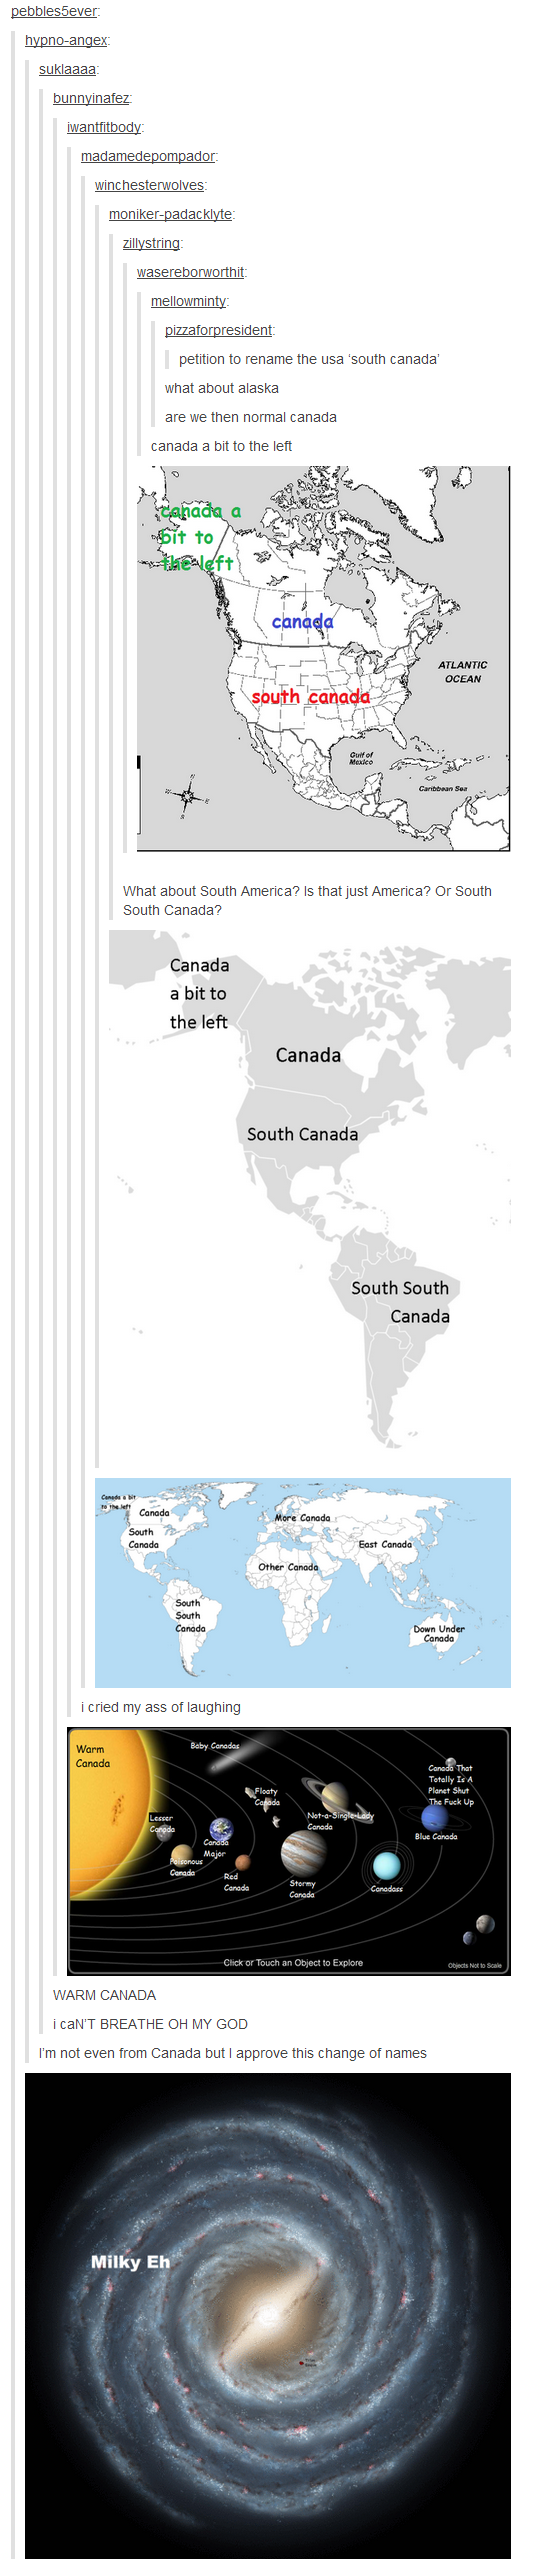 Petition to rename Canada